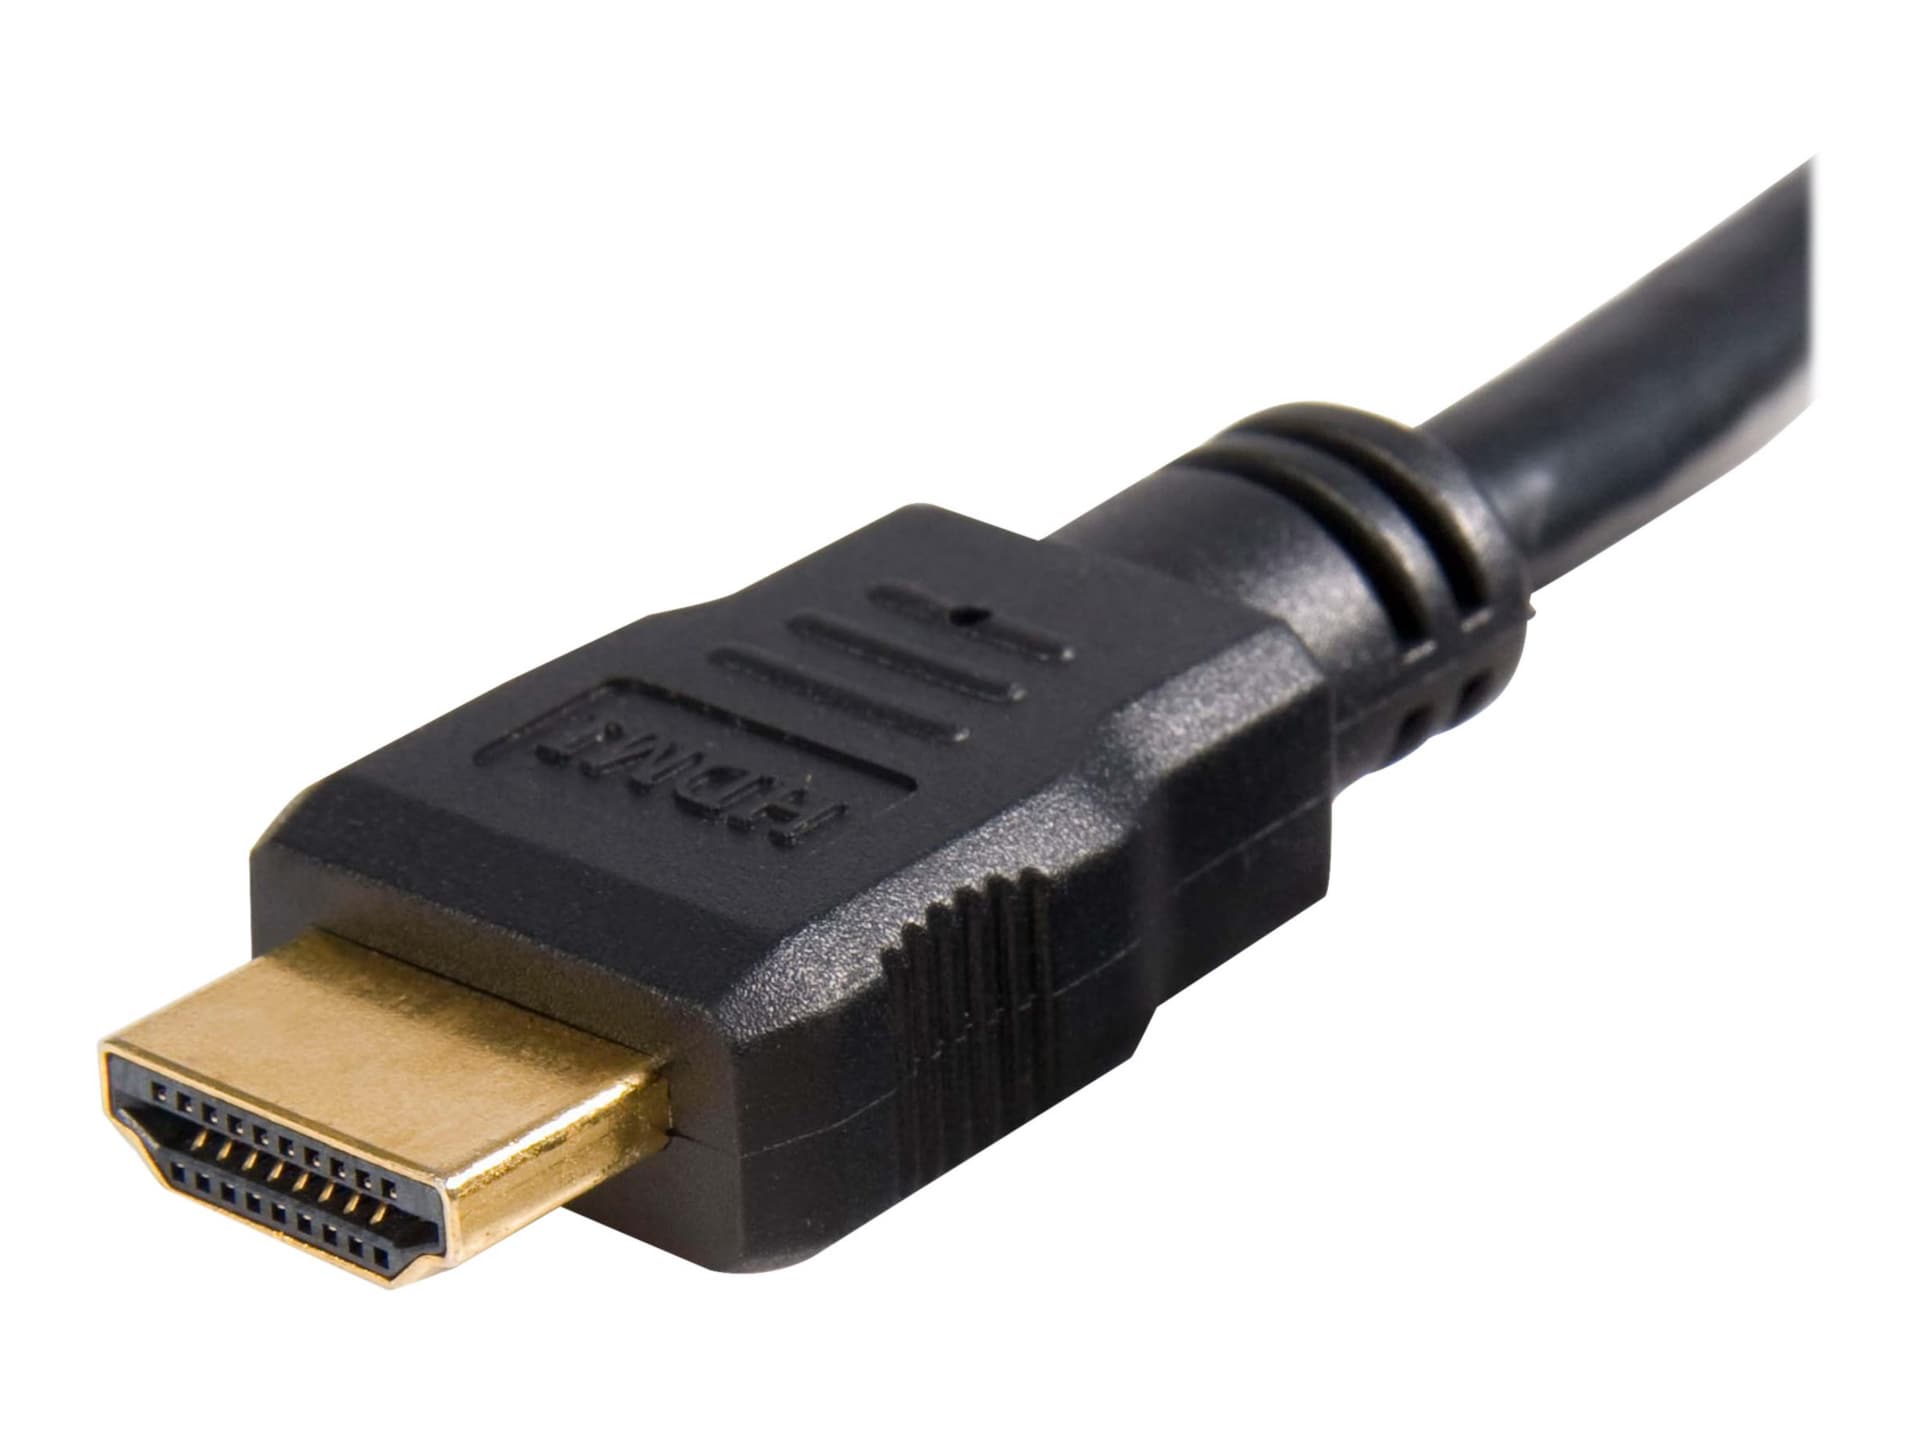 StarTech.com 1ft/30cm HDMI Cable, 4K High Speed HDMI Cable with Ethernet, Ultra HD 4K 30Hz Video, HDMI 1.4 Cable, HDMI